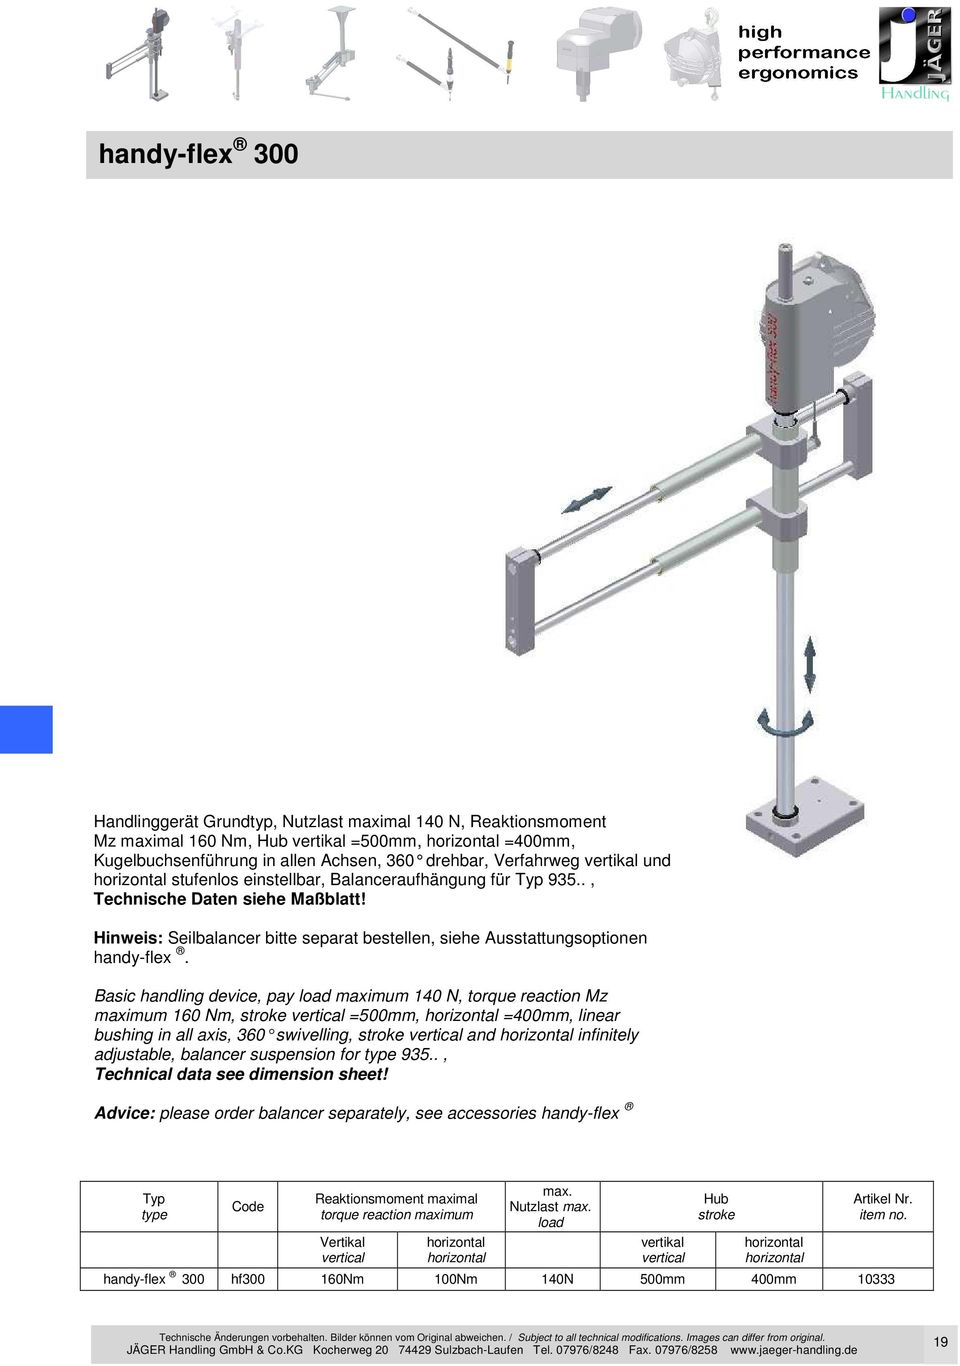 Basic handling device, pay load maximum 140 N, torque reaction Mz maximum 160 Nm, stroke vertical =500mm, =400mm, linear bushing in all axis, 360 swivelling, stroke vertic al and infinitely